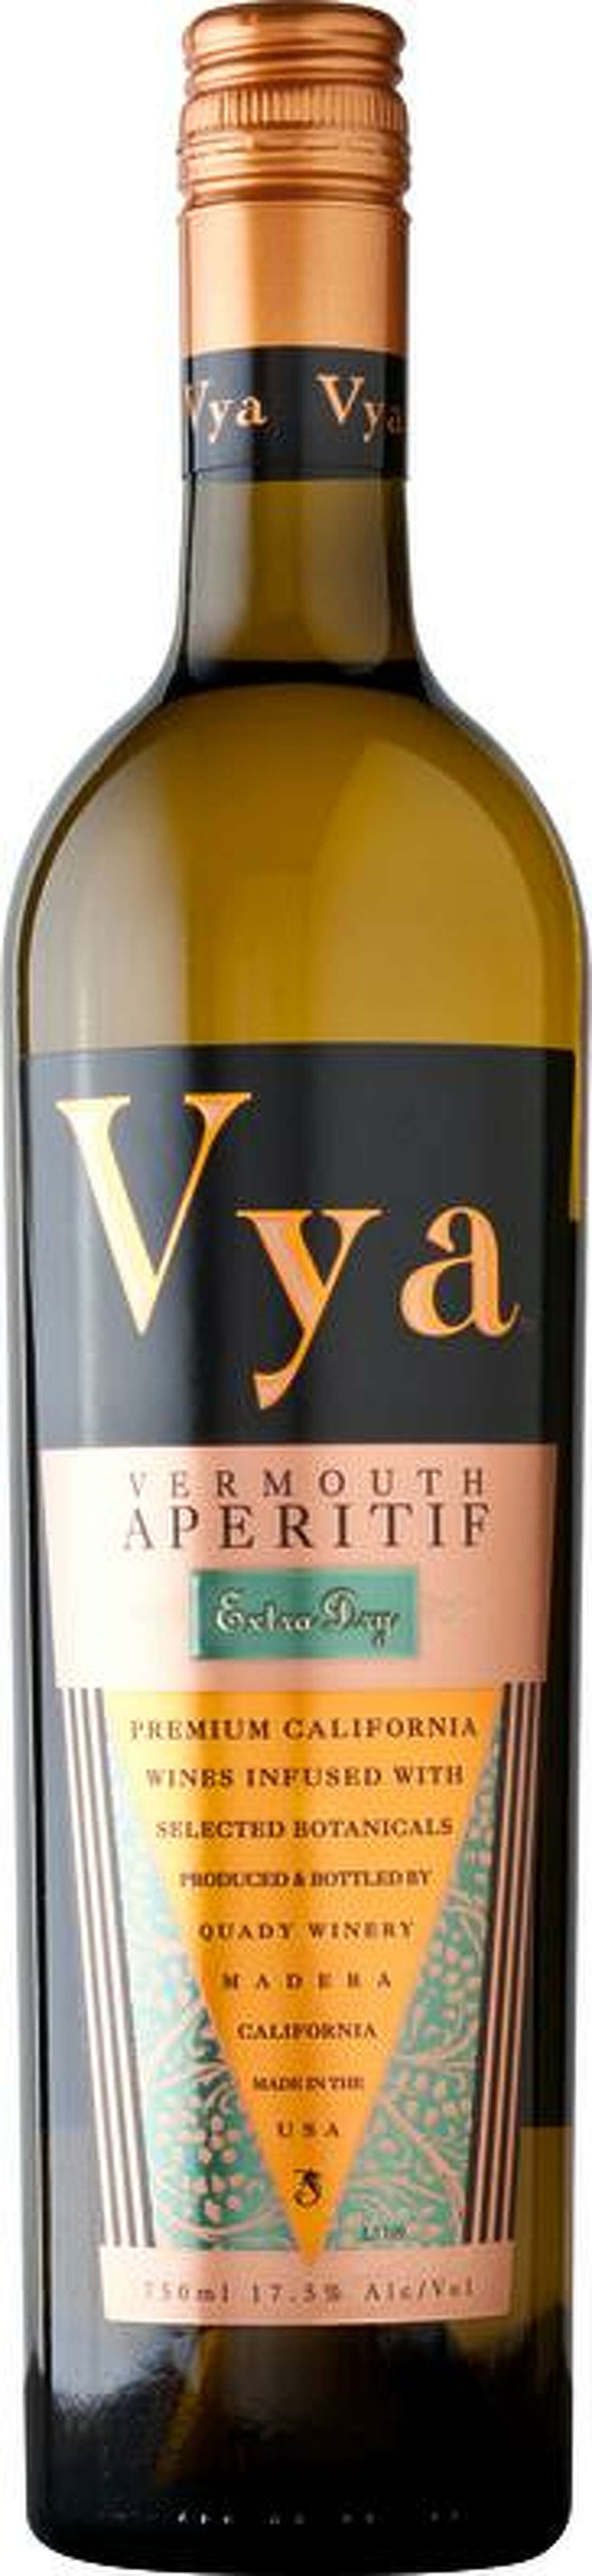 Vya vermouth from Quady Winery.